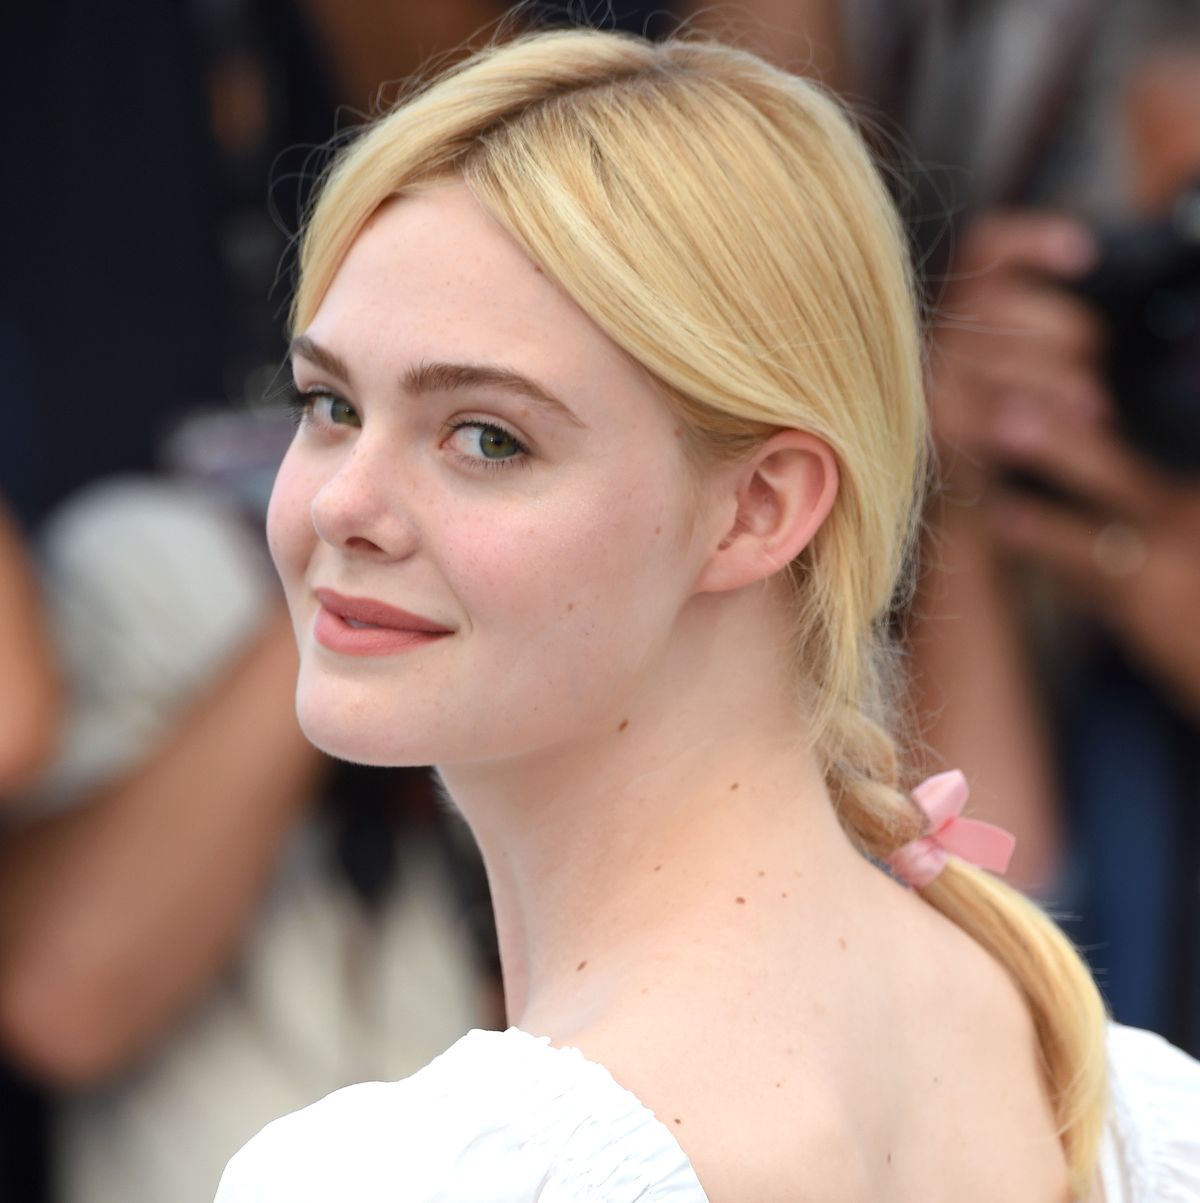 elle-fanning-attends-the-the-beguiled-photocall-during-the-news-photo-1682540927.jpg